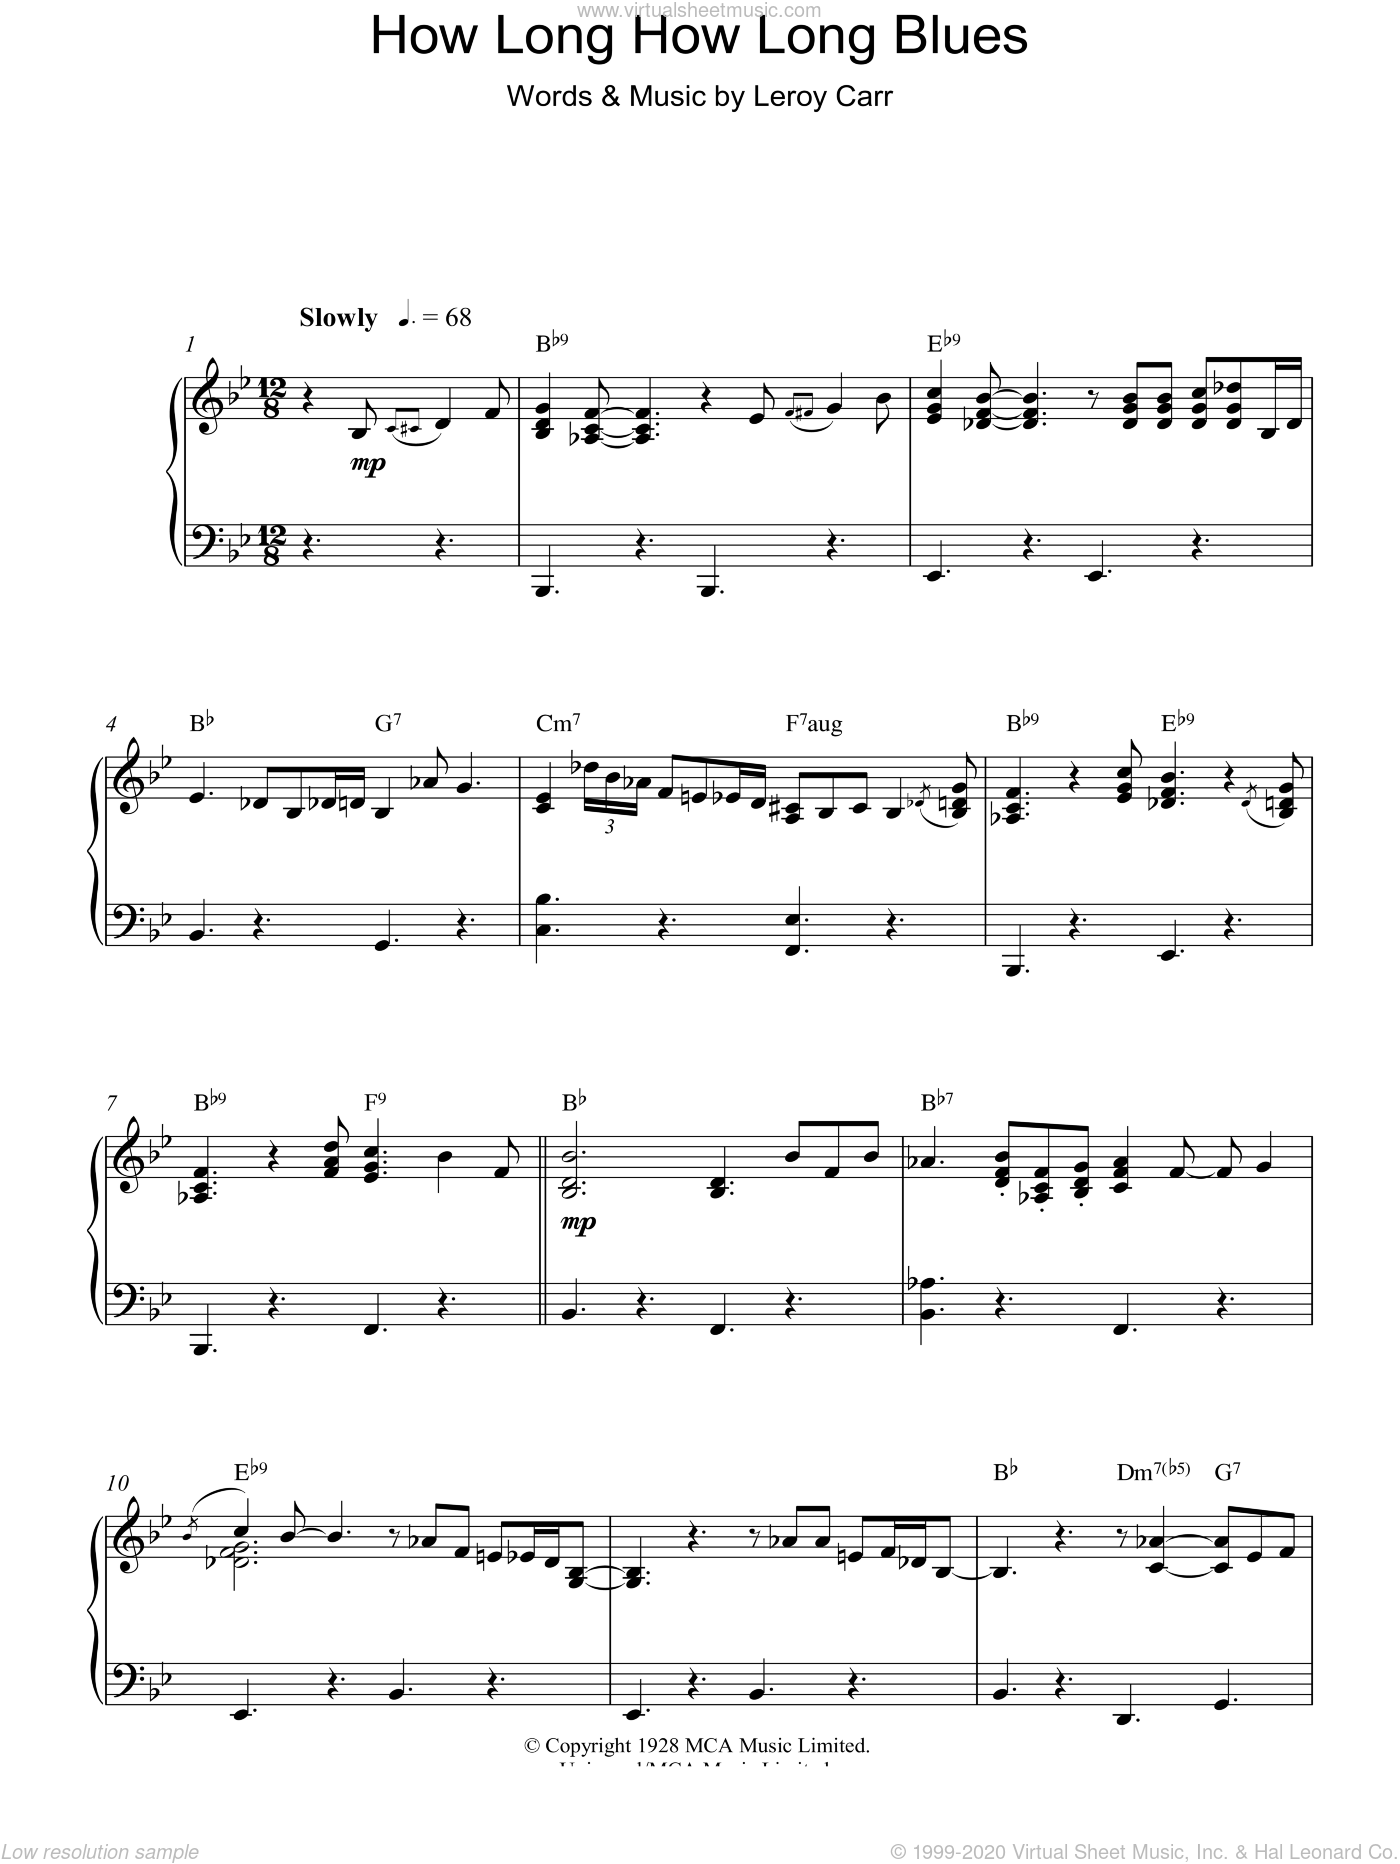 Charles - How Long How Long Blues sheet music for piano solo